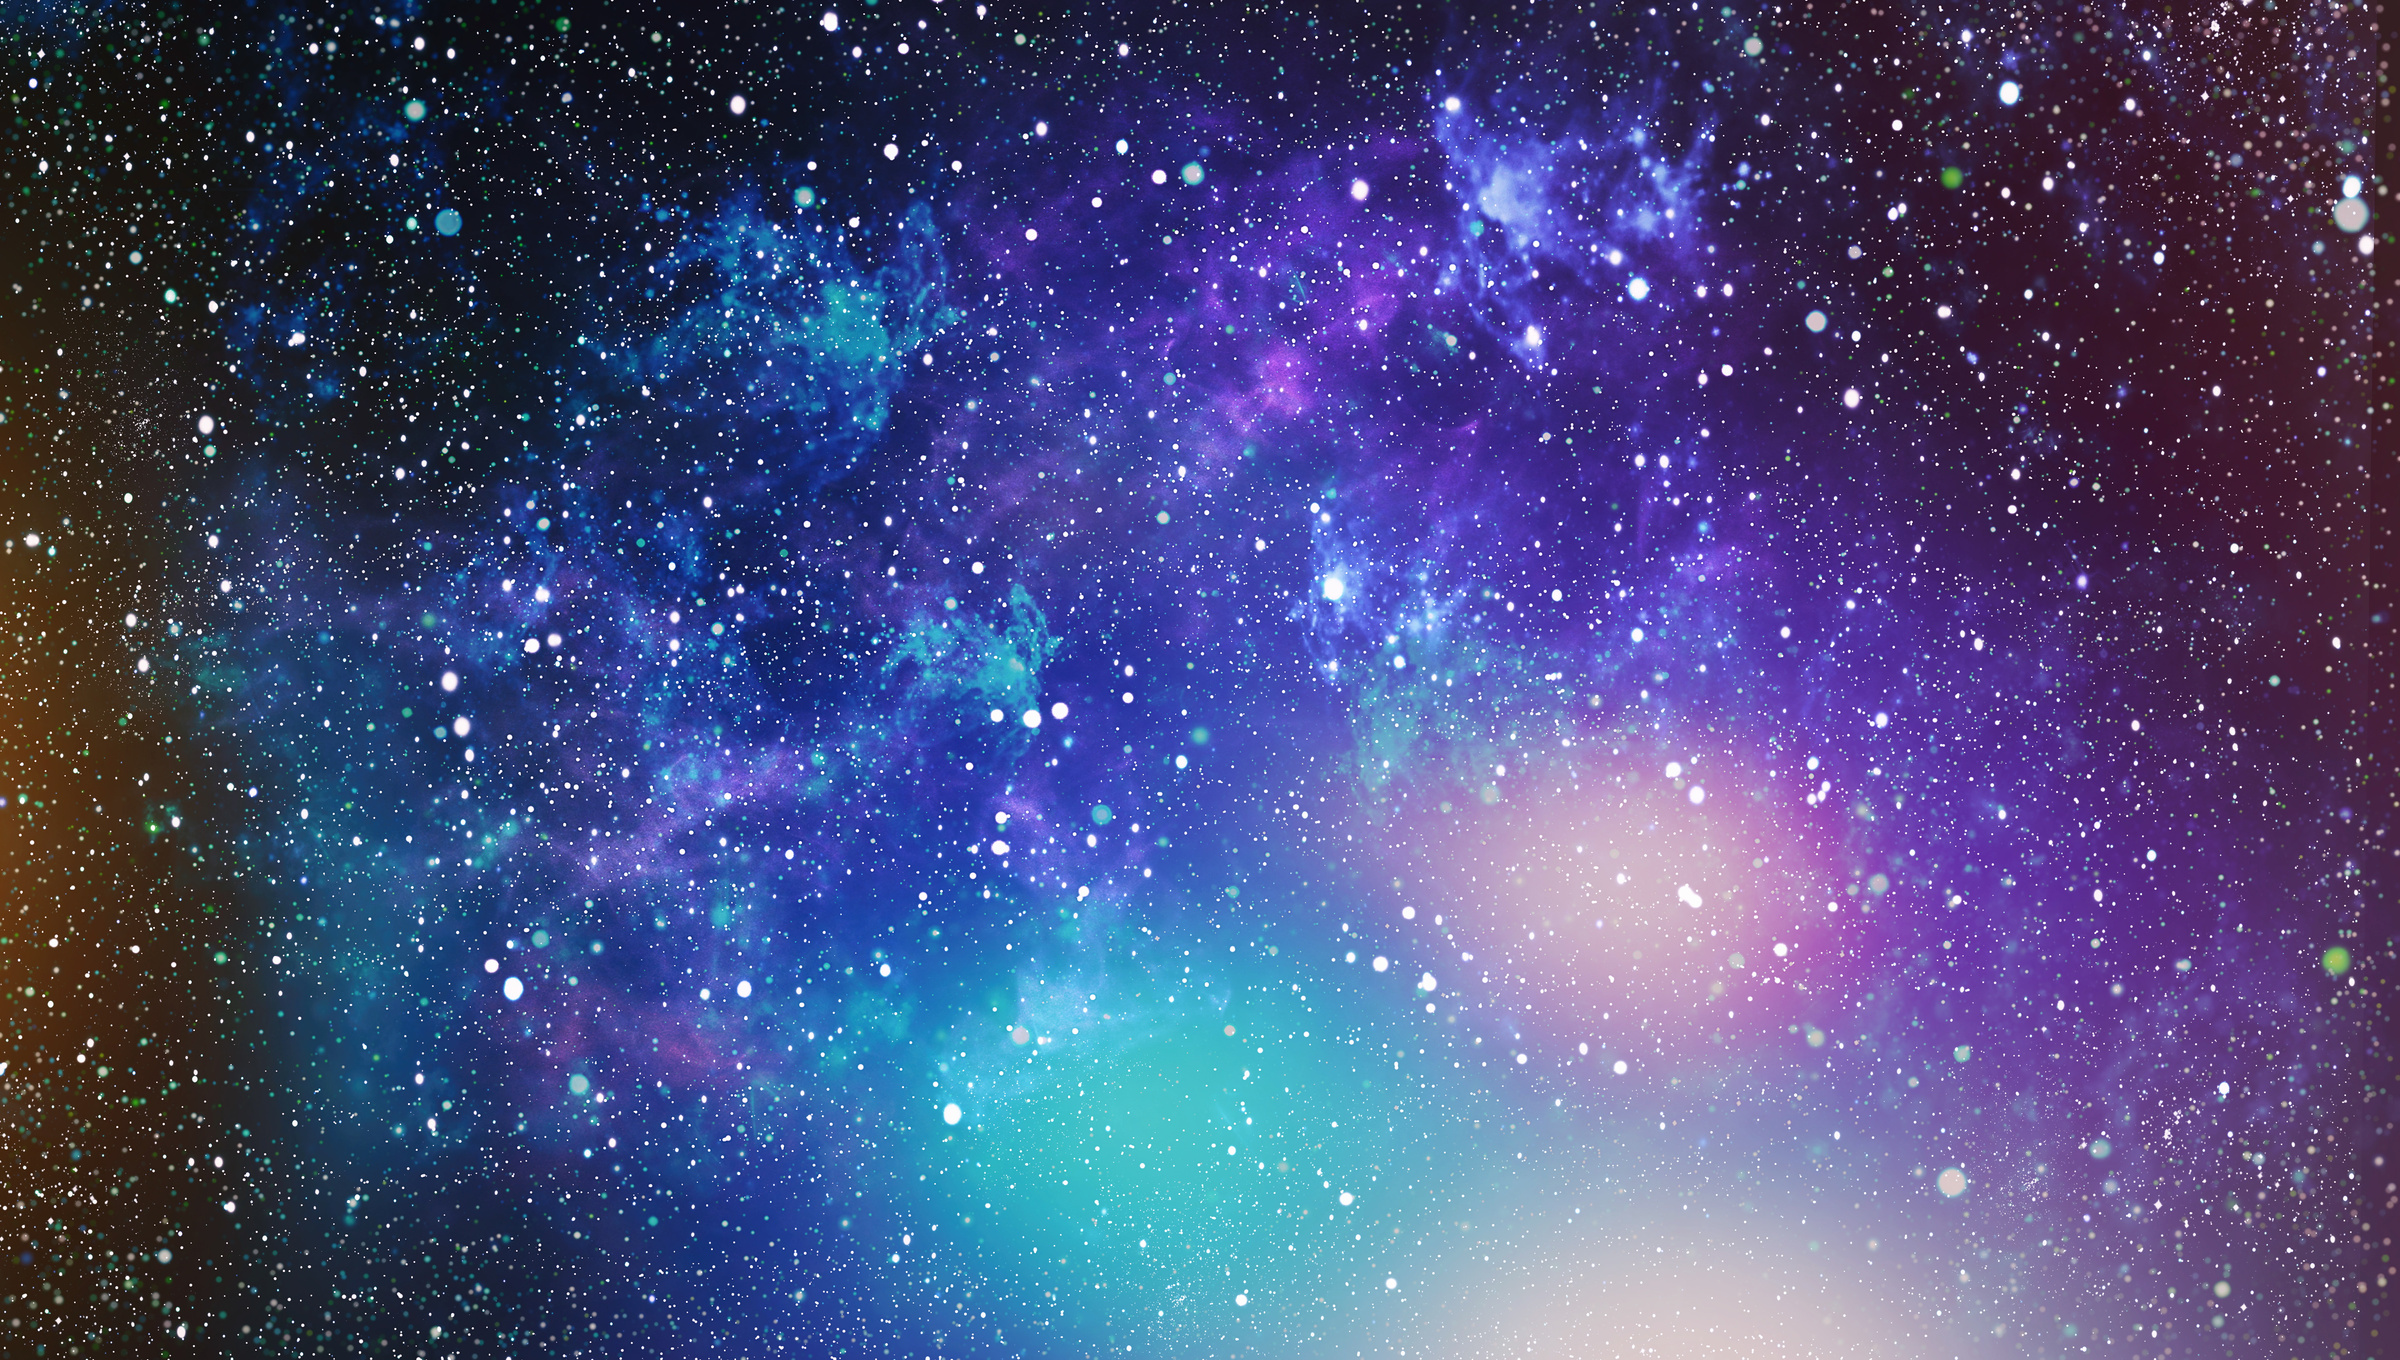 Starry Outer Space Background Texture